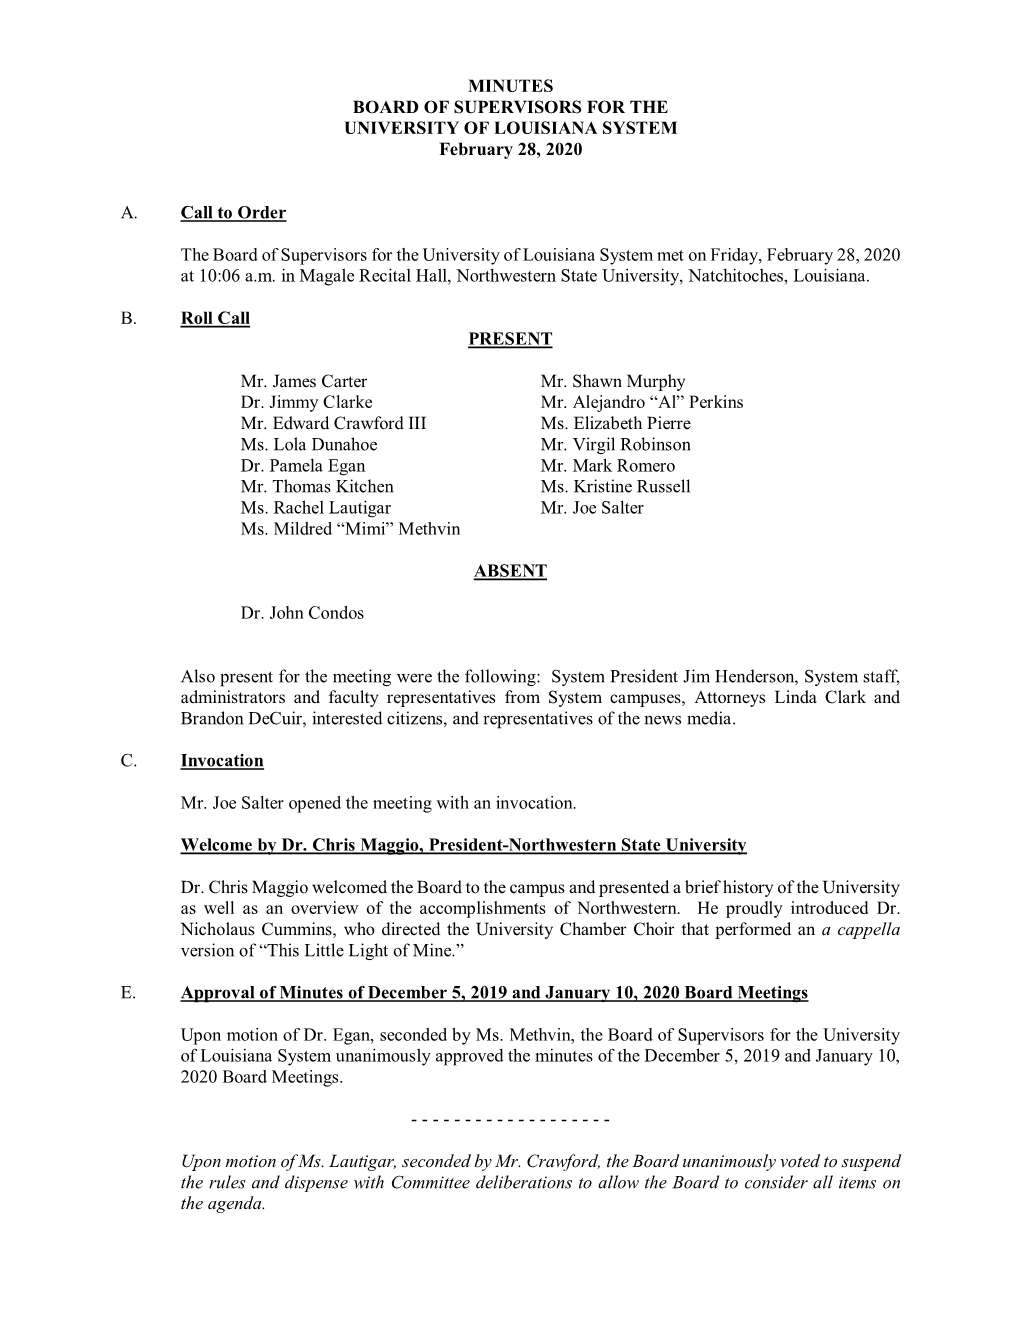 MINUTES BOARD of SUPERVISORS for the UNIVERSITY of LOUISIANA SYSTEM February 28, 2020